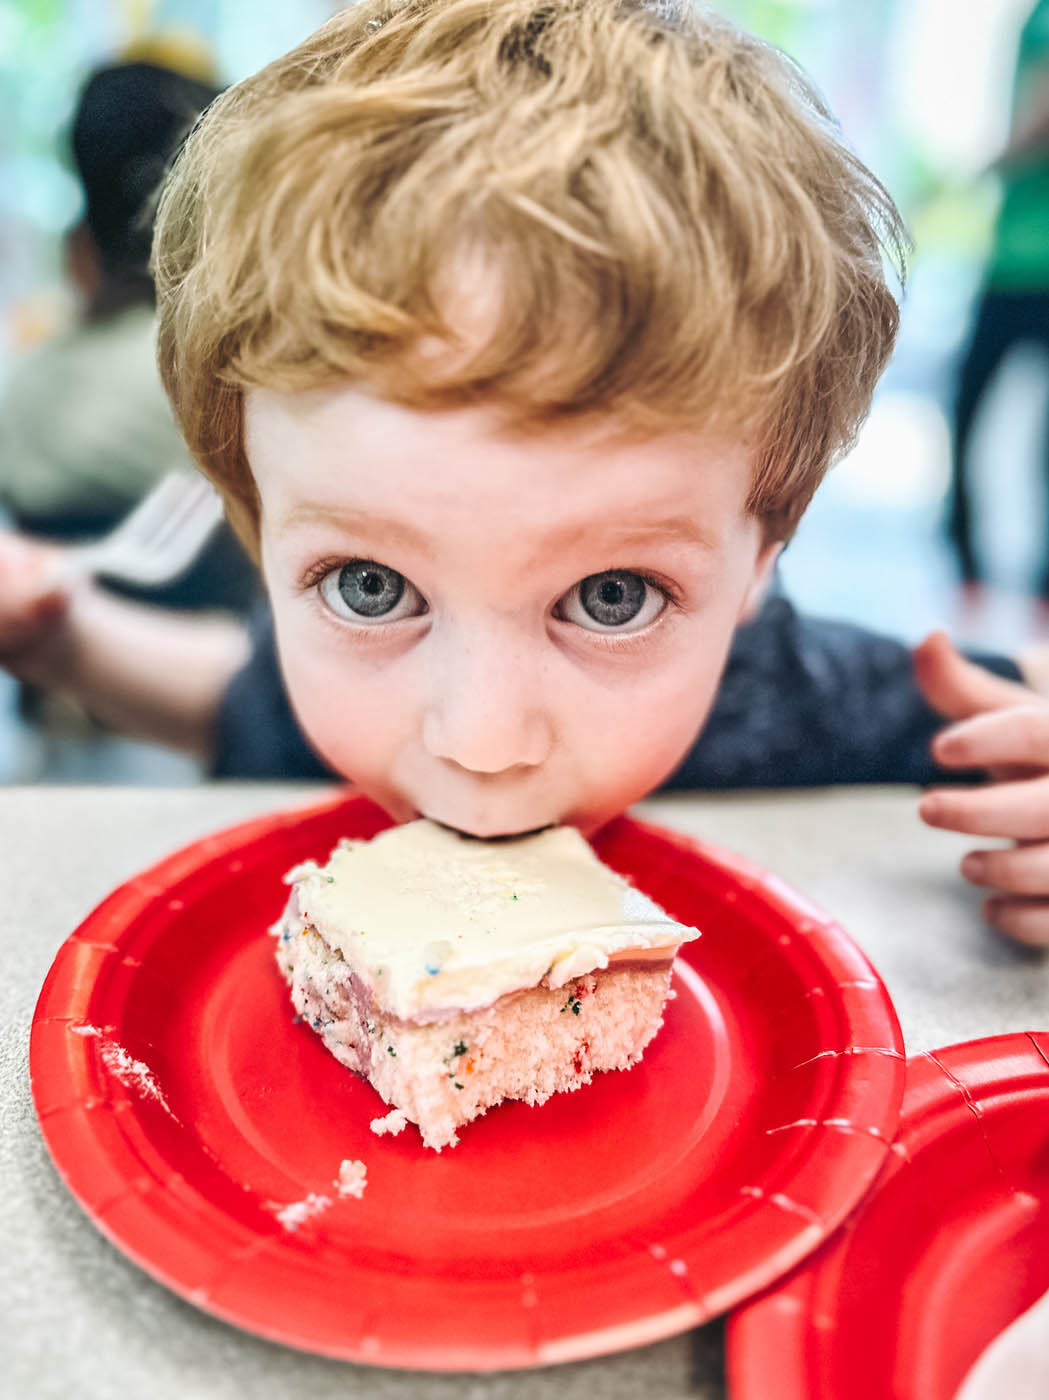 A kid taking a big bite out of a cake piece at Romp n' Roll - a children's party place in Midlothian, VA.